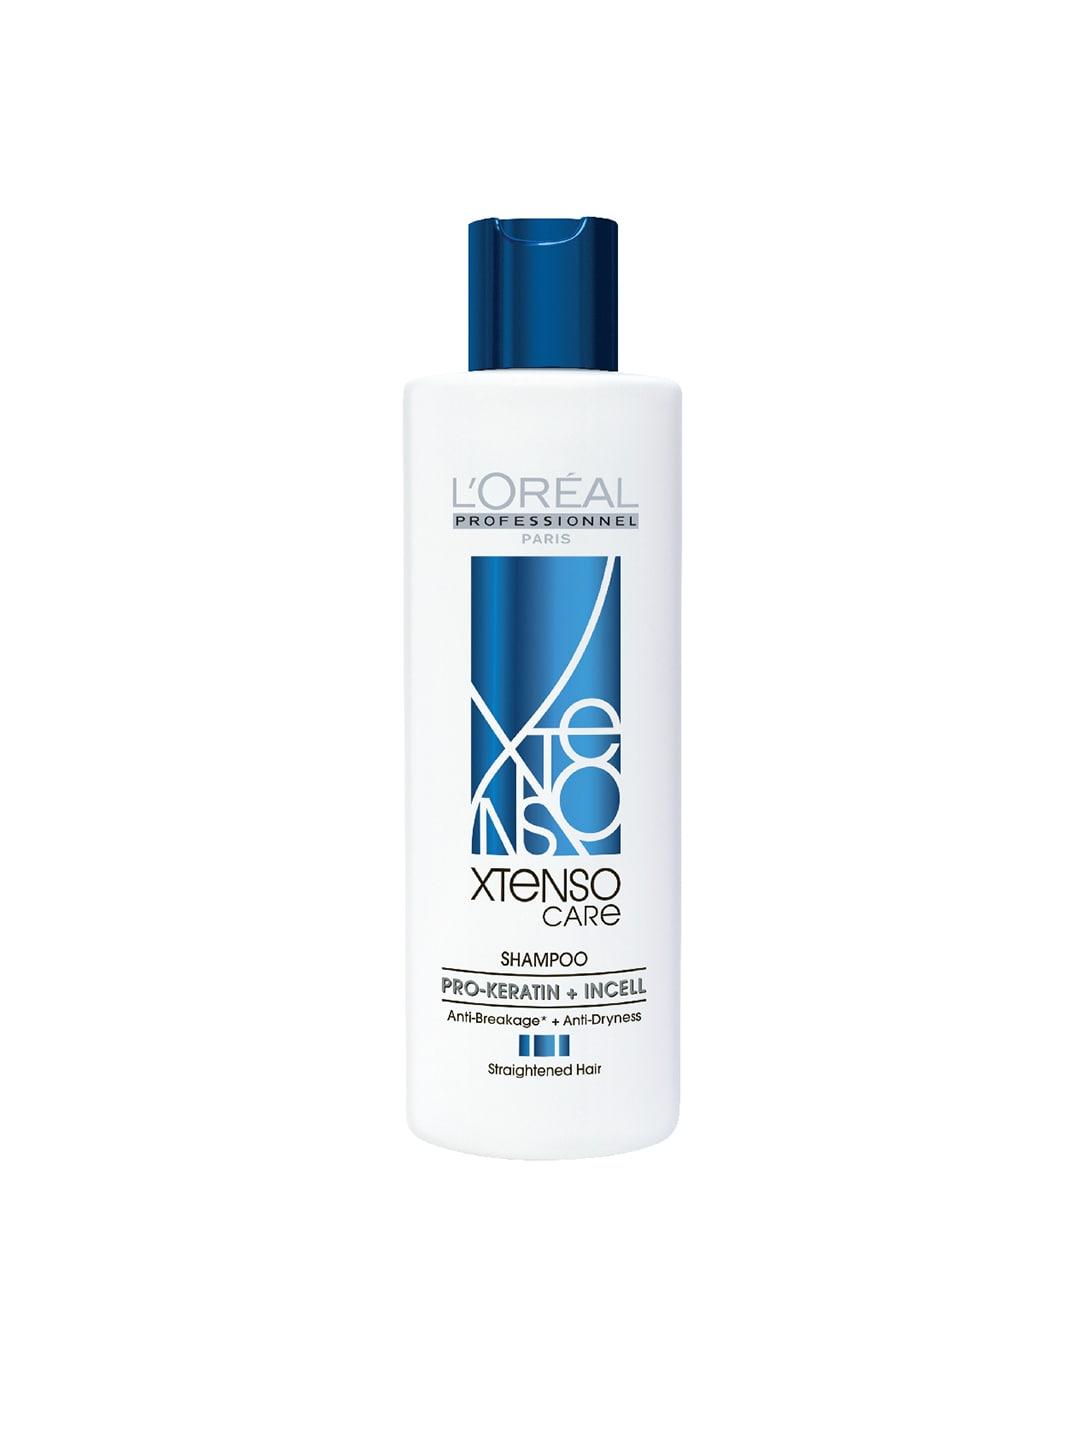 loreal-professionnel-xtenso-care-shampoo-with-pro-keratine-for-straightened-hair-250ml